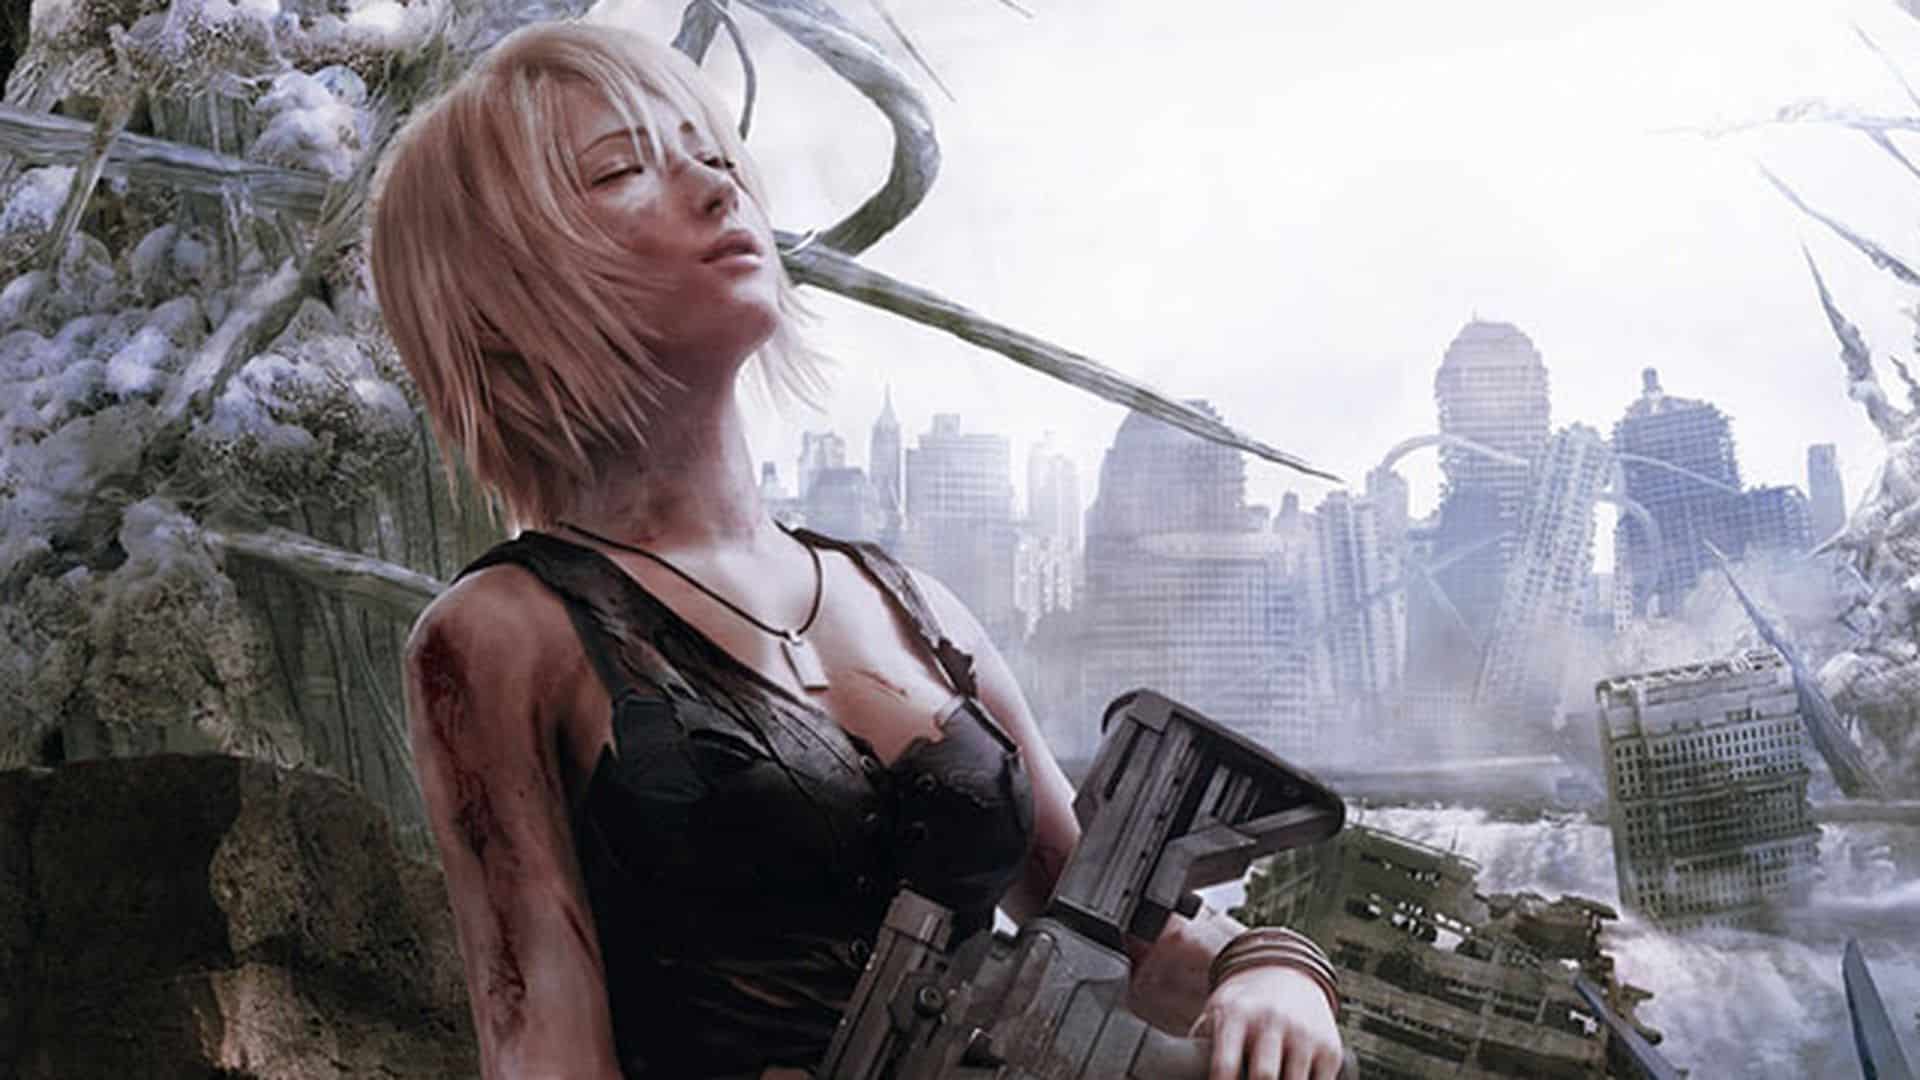 Square Enix Trademarks Title Symbiogenesis, Possibly A Parasite